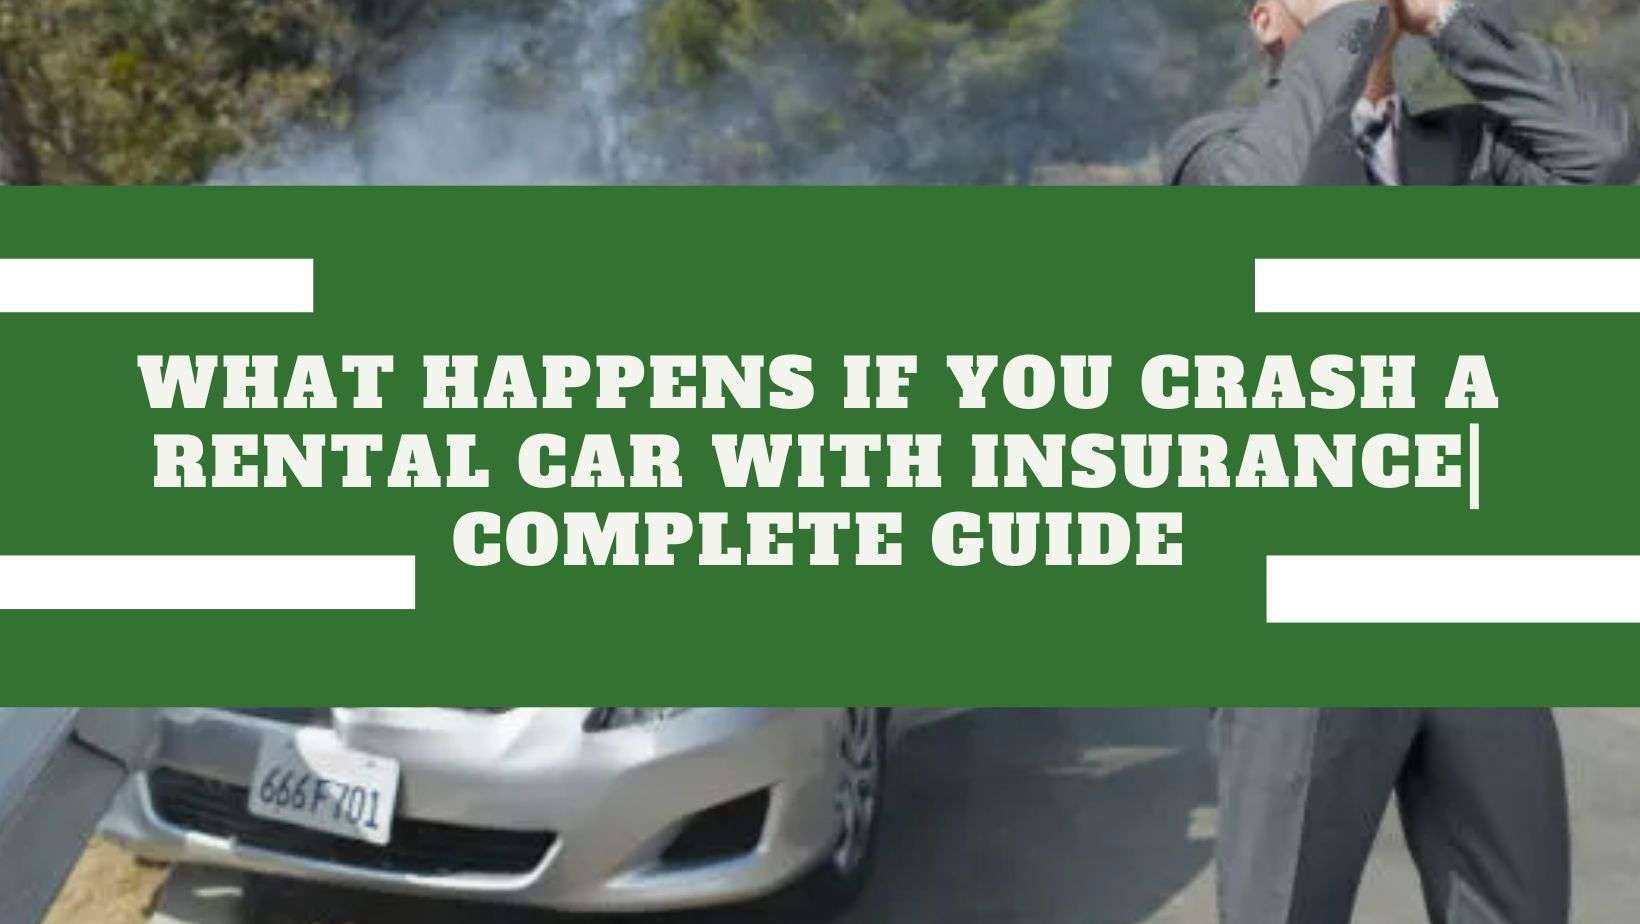 What-Happens-if-you-Crash-a-Rental-Car-with-Insurance